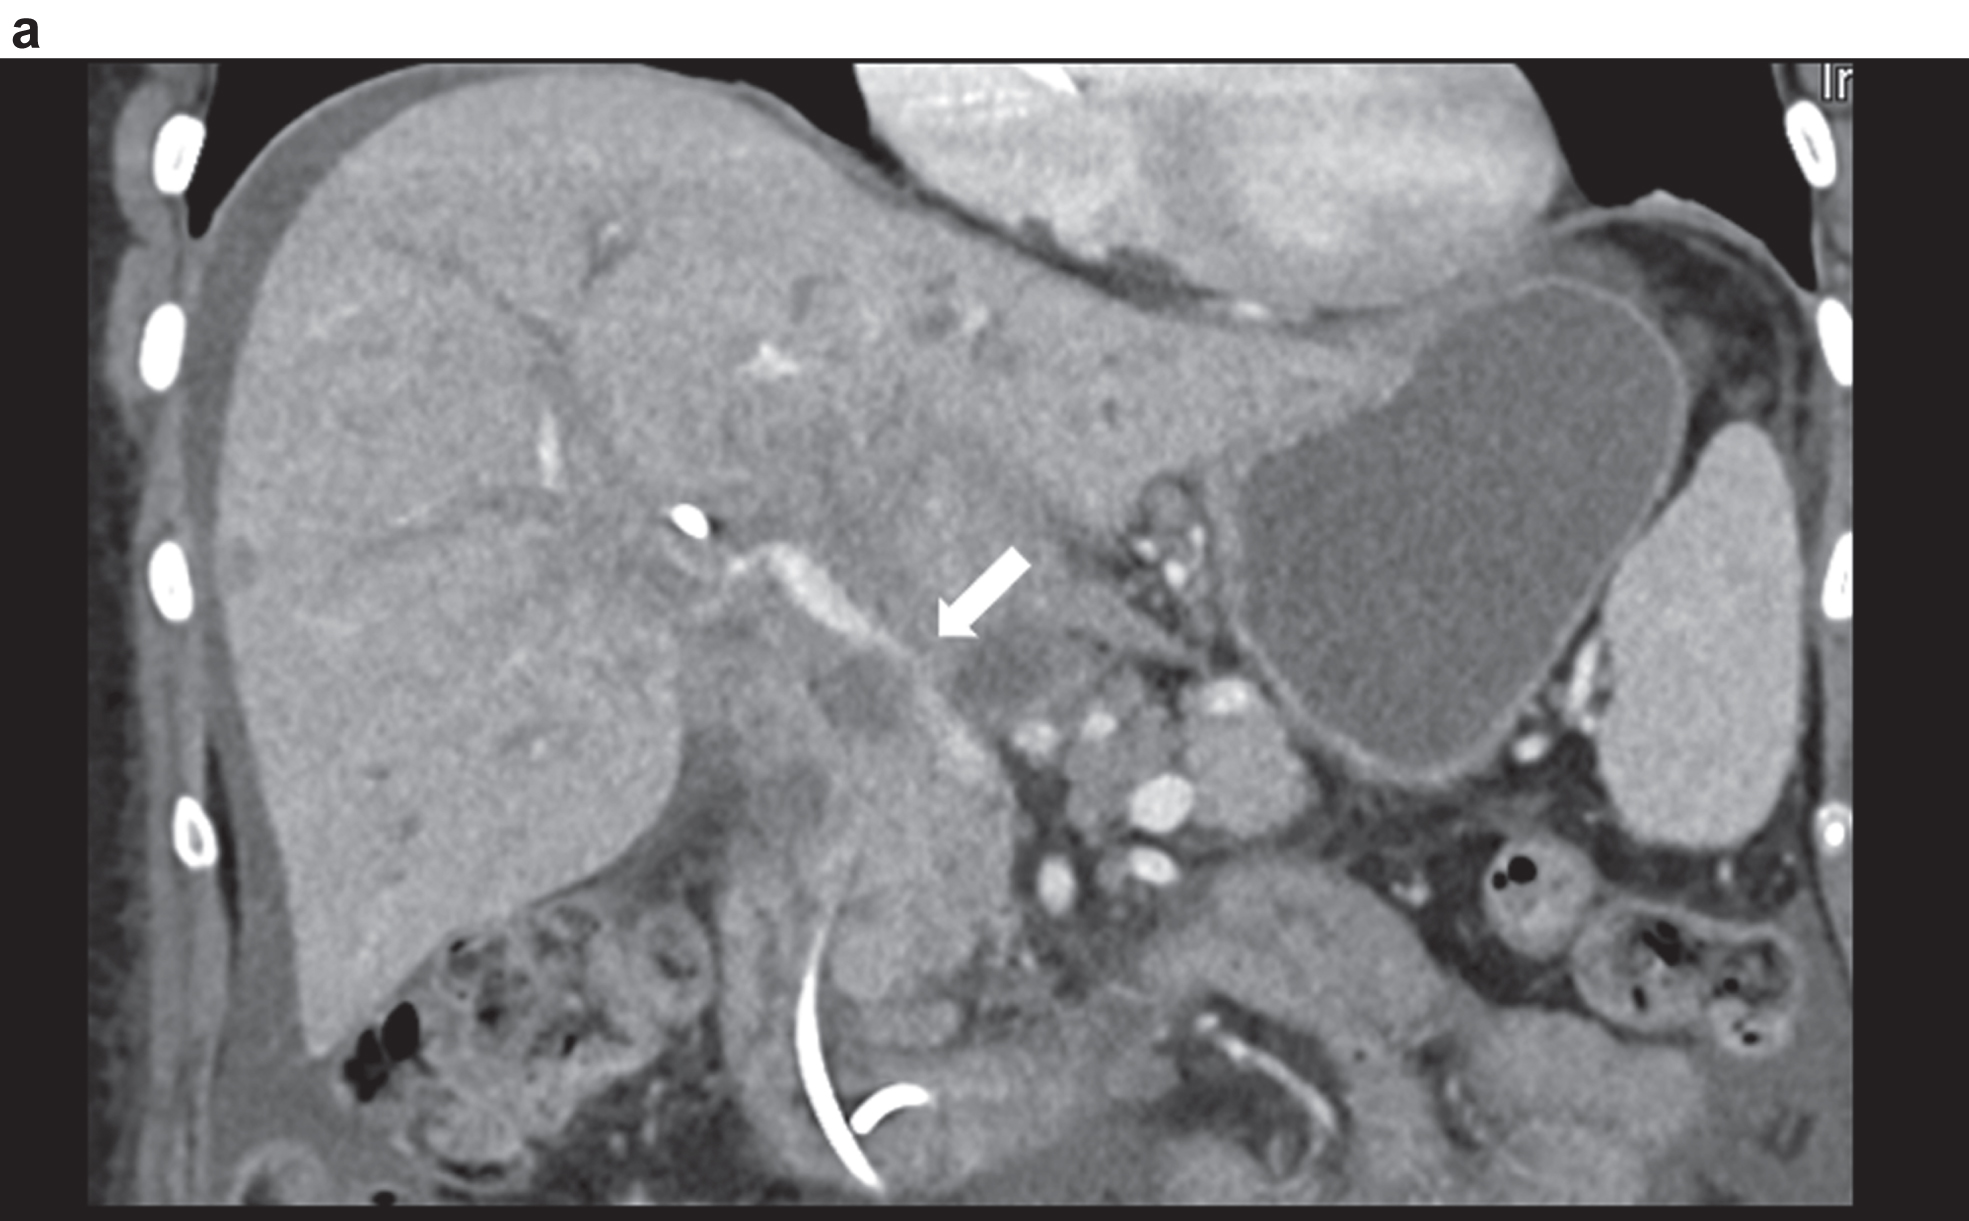 Highest degree of lumen reduction of the portal vein, confluens and superior mesenteric vein (VMS) due to space occupation at the mesenteric root, at the hepatic hilus and intrahepatic in contrast-enhanced CT. Vascular narrowing of the port vein (arrow).